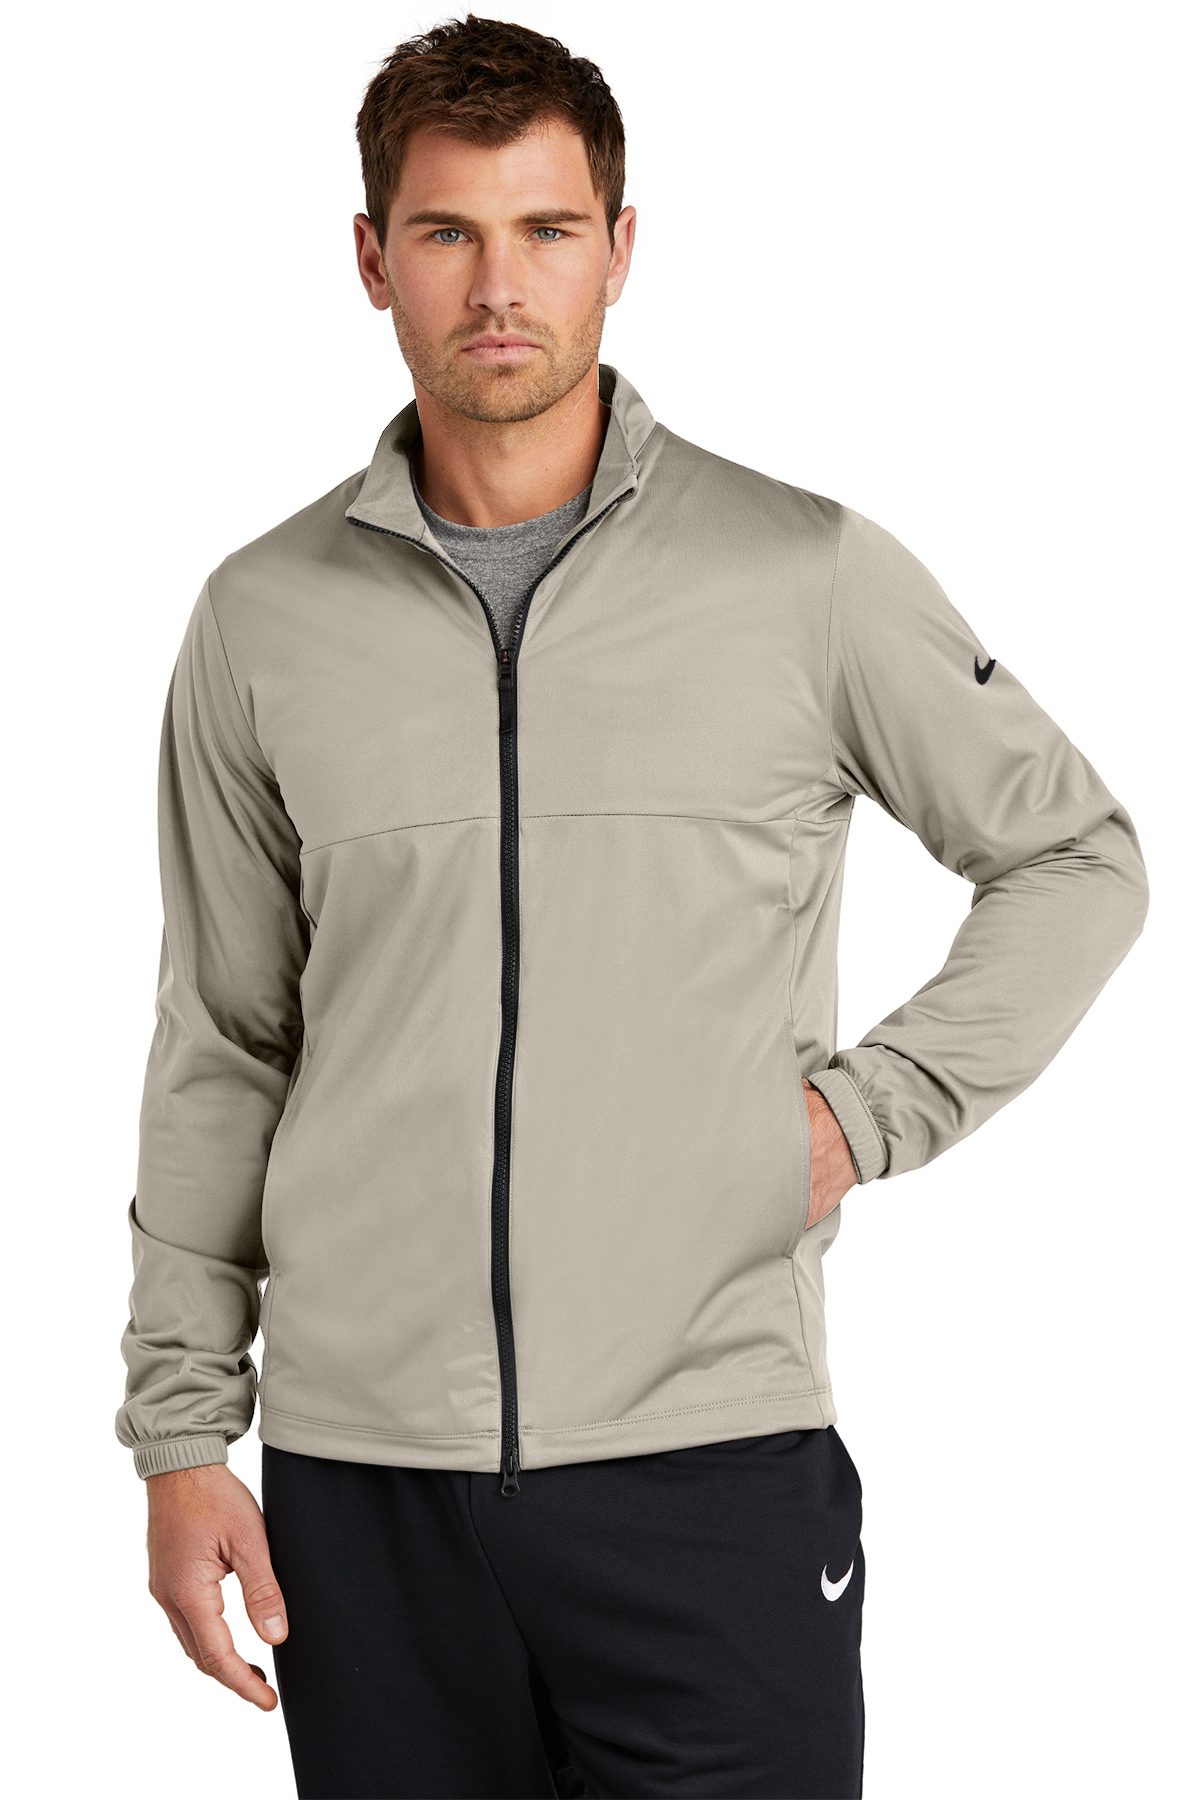 Nike Storm-FIT Full-Zip Jacket, Product